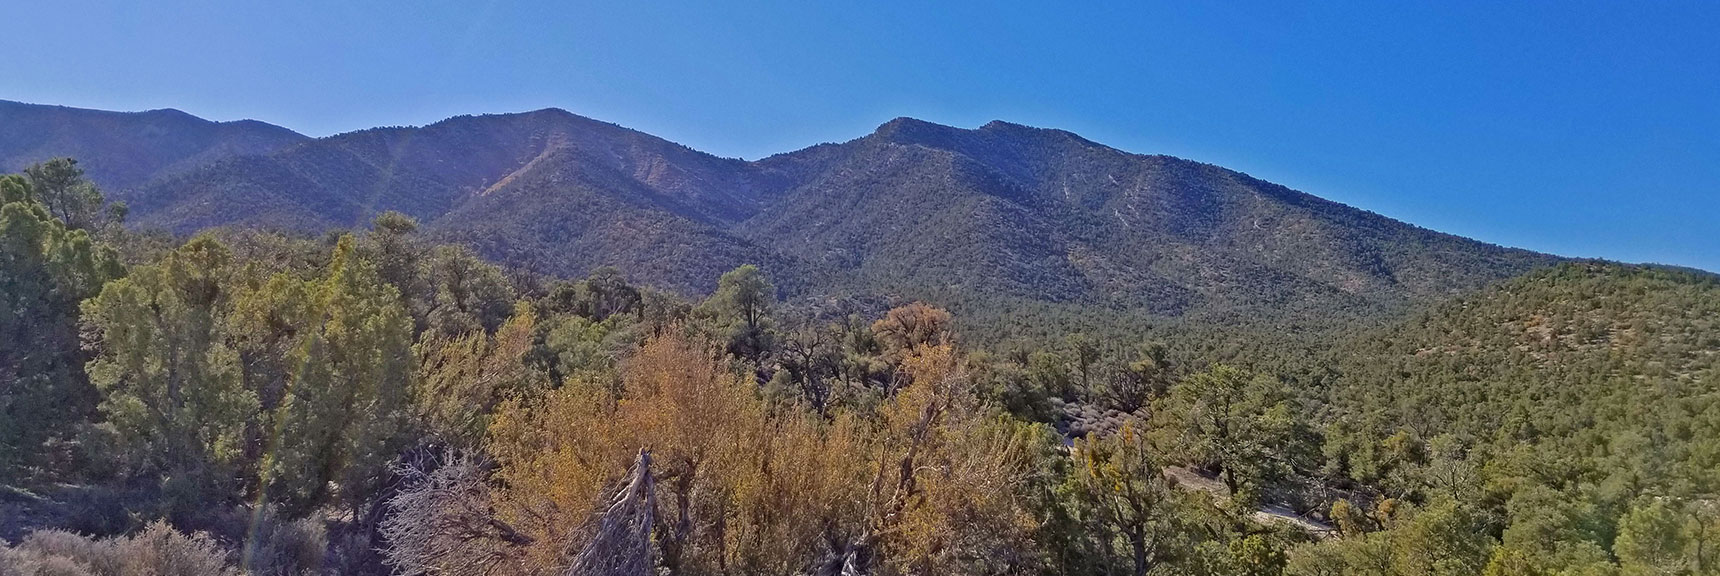 Burnt Peak and El Bastardo Mt. Viewed from End of 4WD Approach Road | La Madre Mountain,, El Padre Mountain, Burnt Peak | La Madre Mountains Wilderness, Nevada